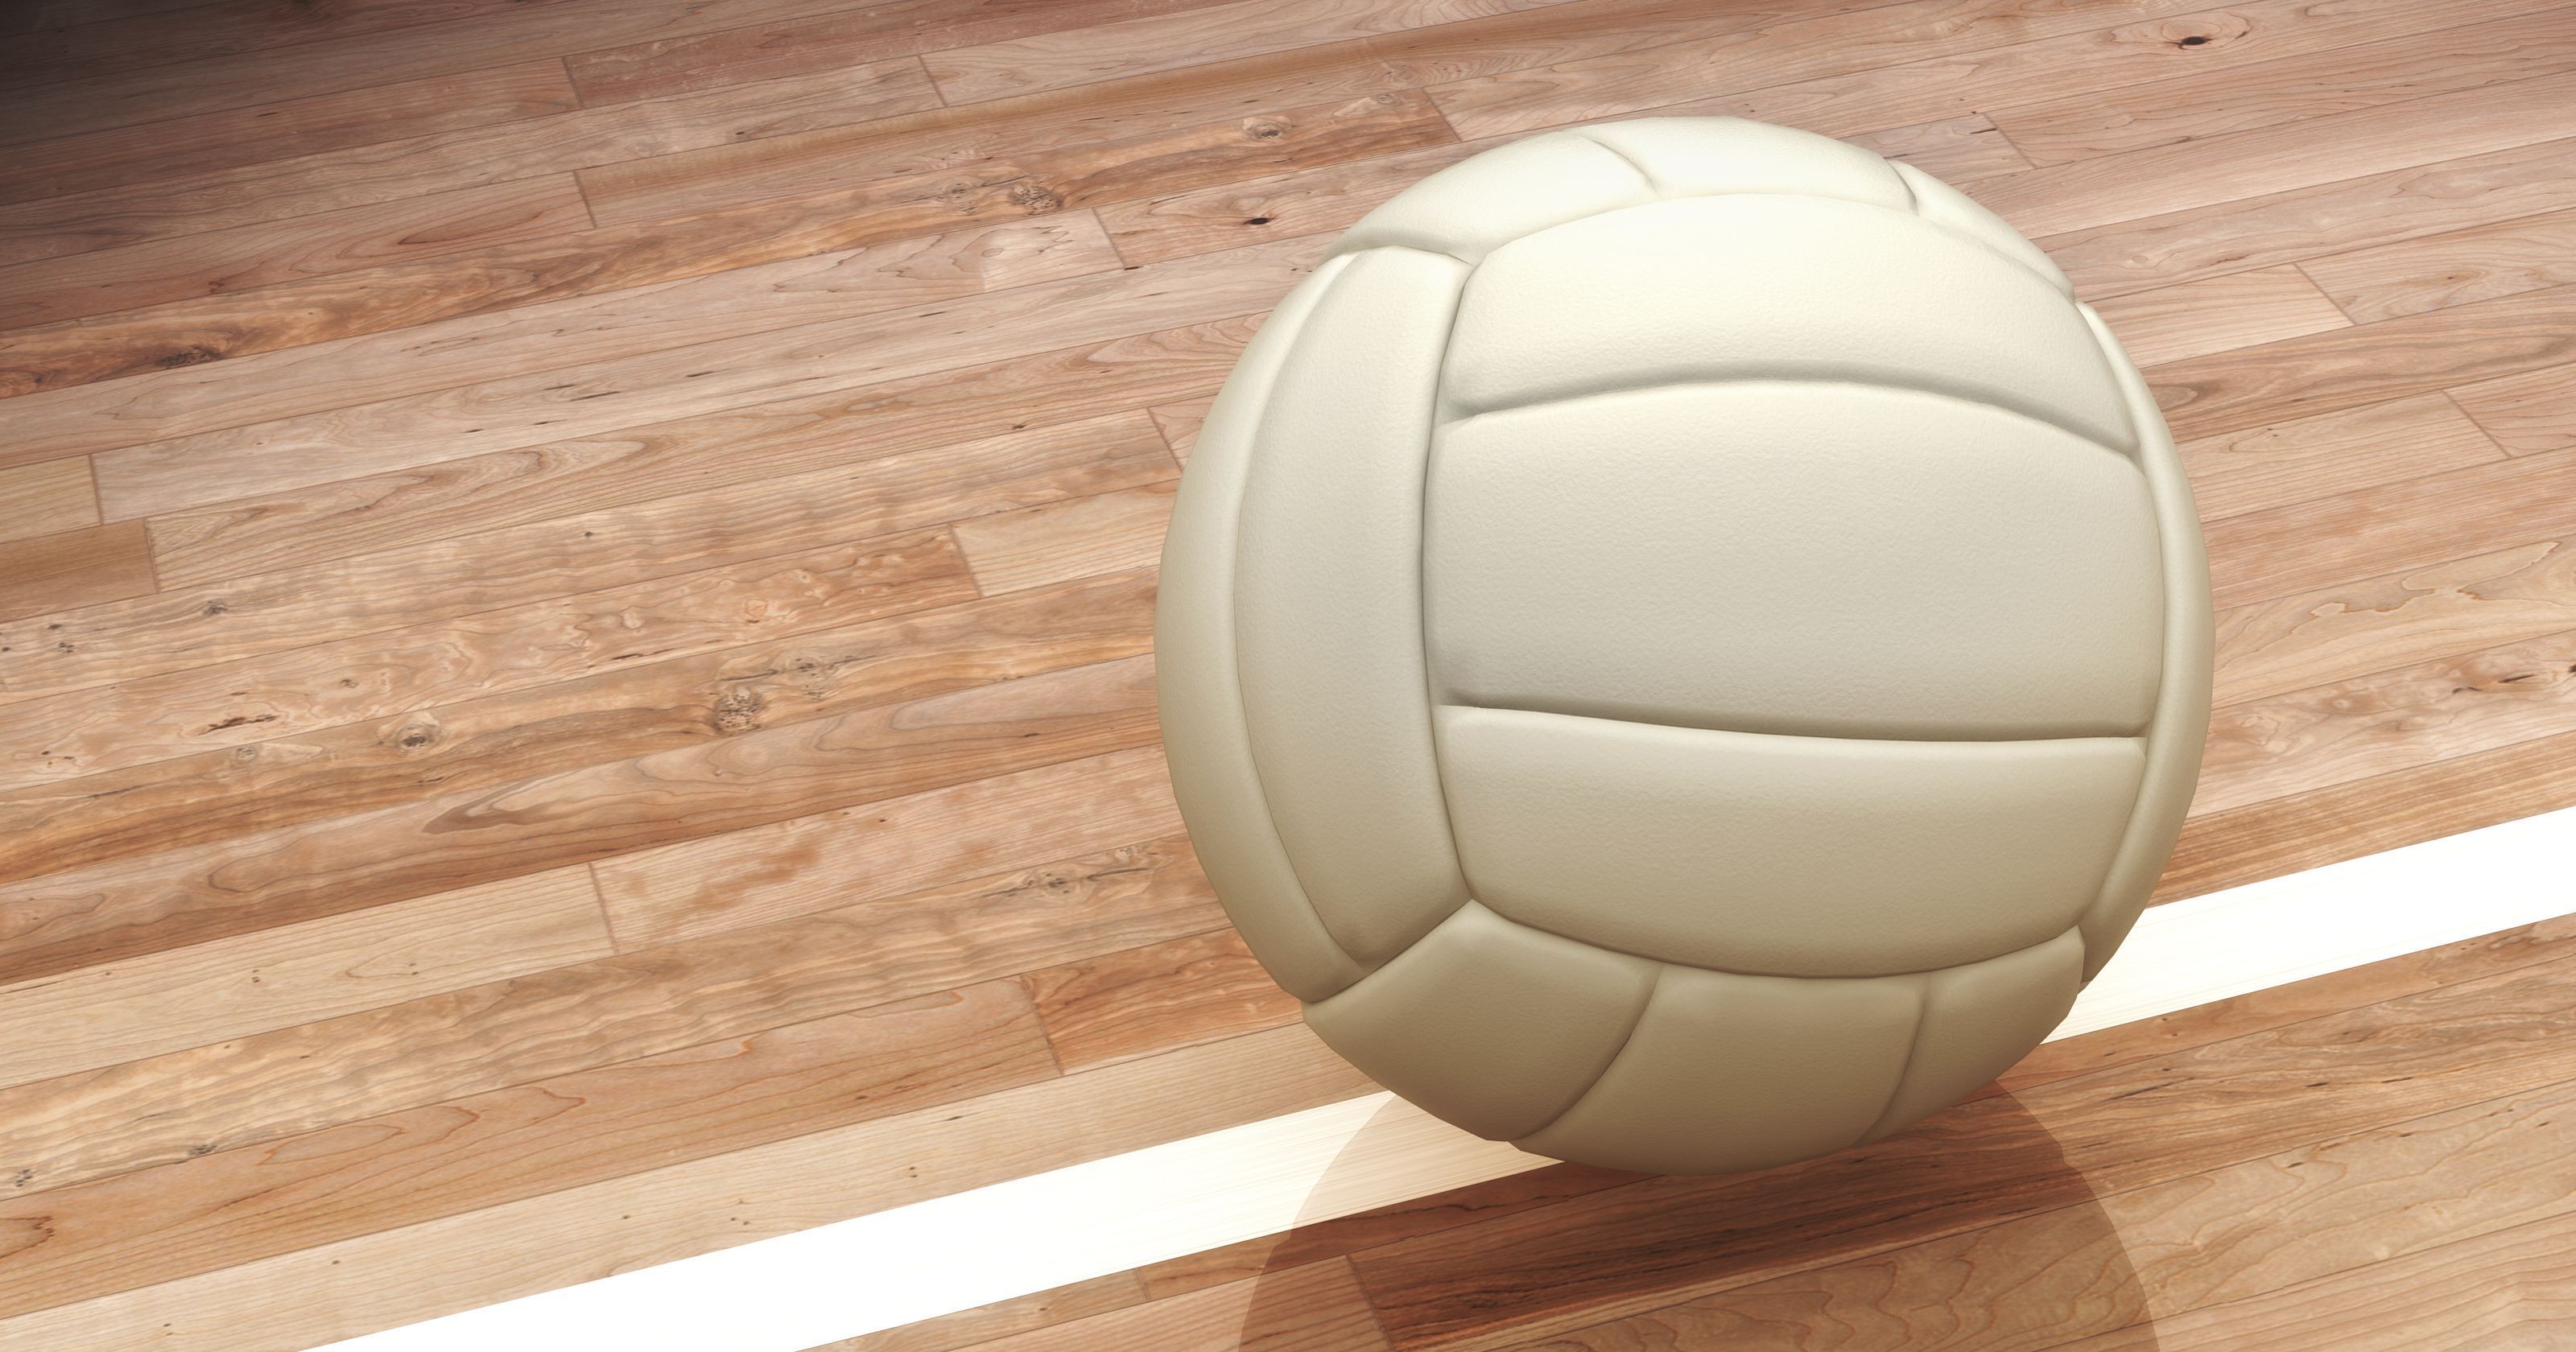 Volleyball season ends for local schools